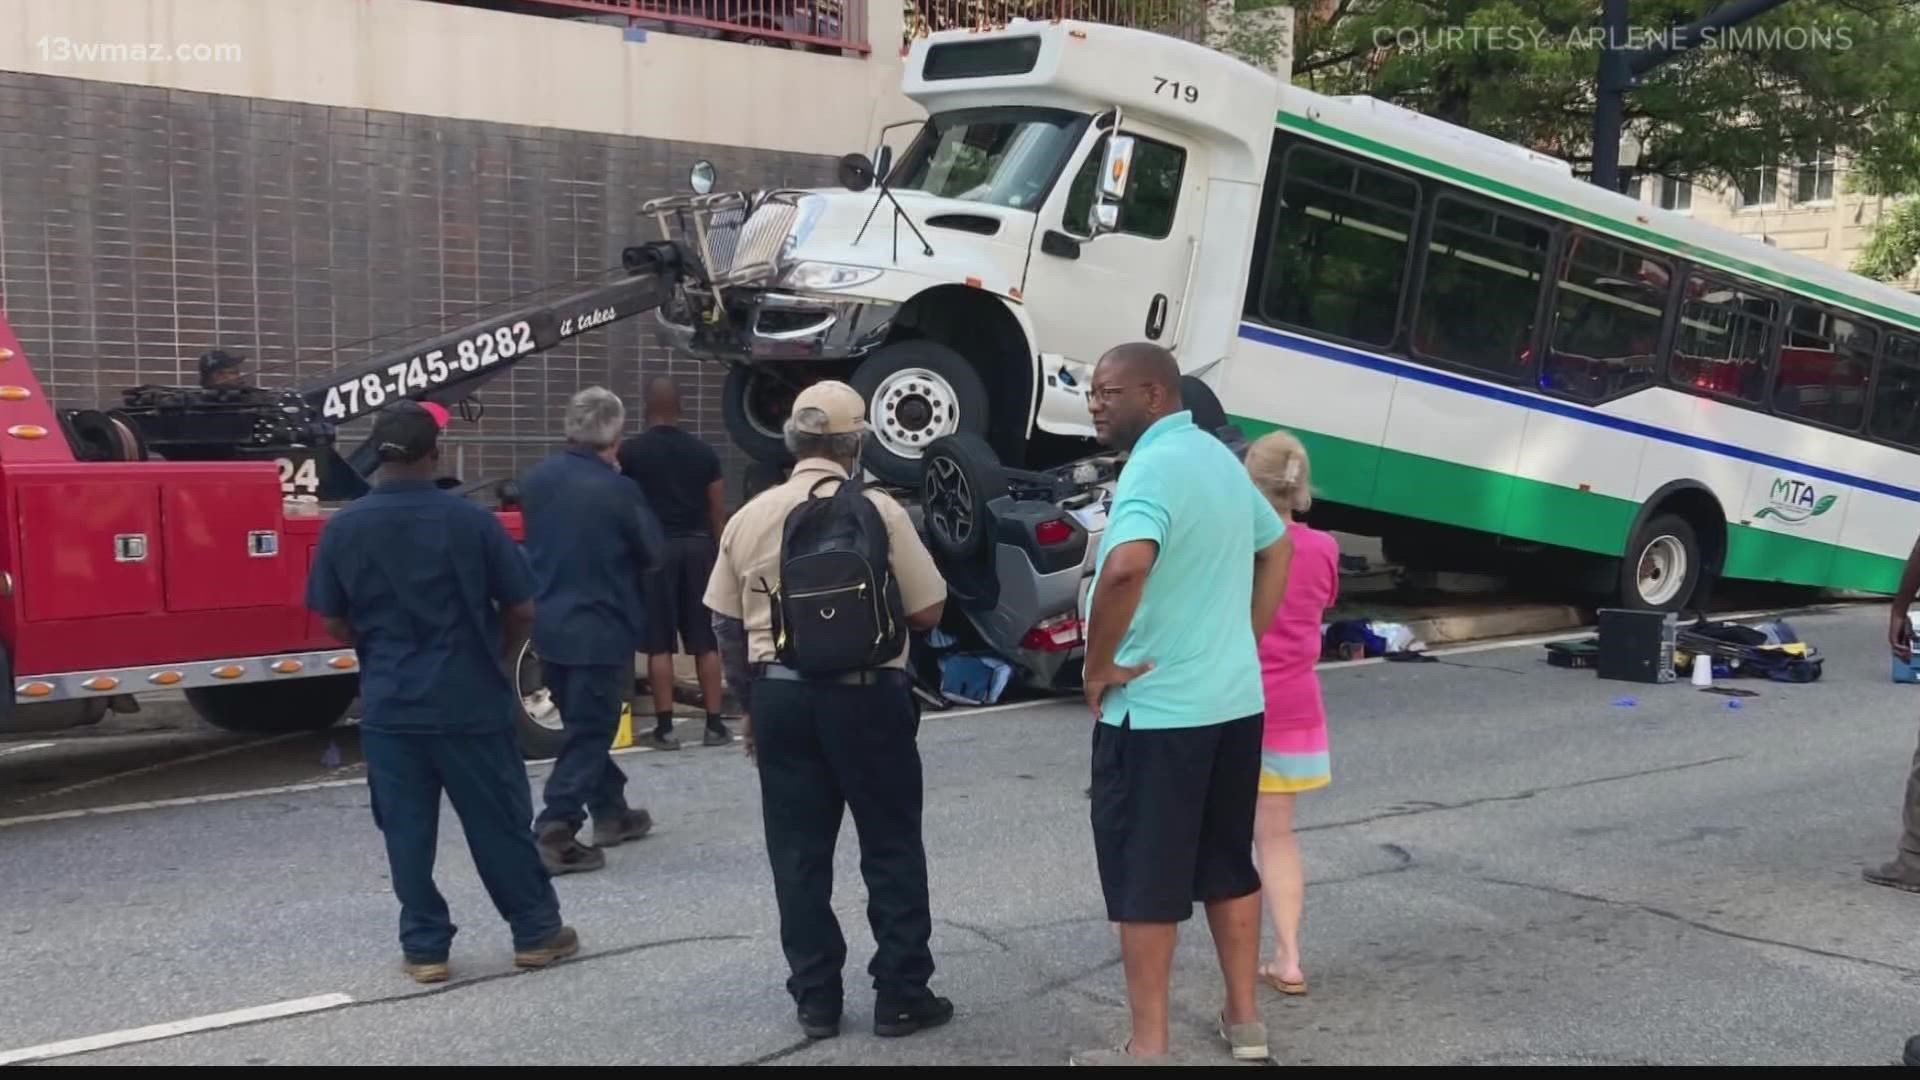 People in Macon are calling an off-duty firefighter a hero after a Macon Transit bus crashed and landed on top of a car in downtown Macon.